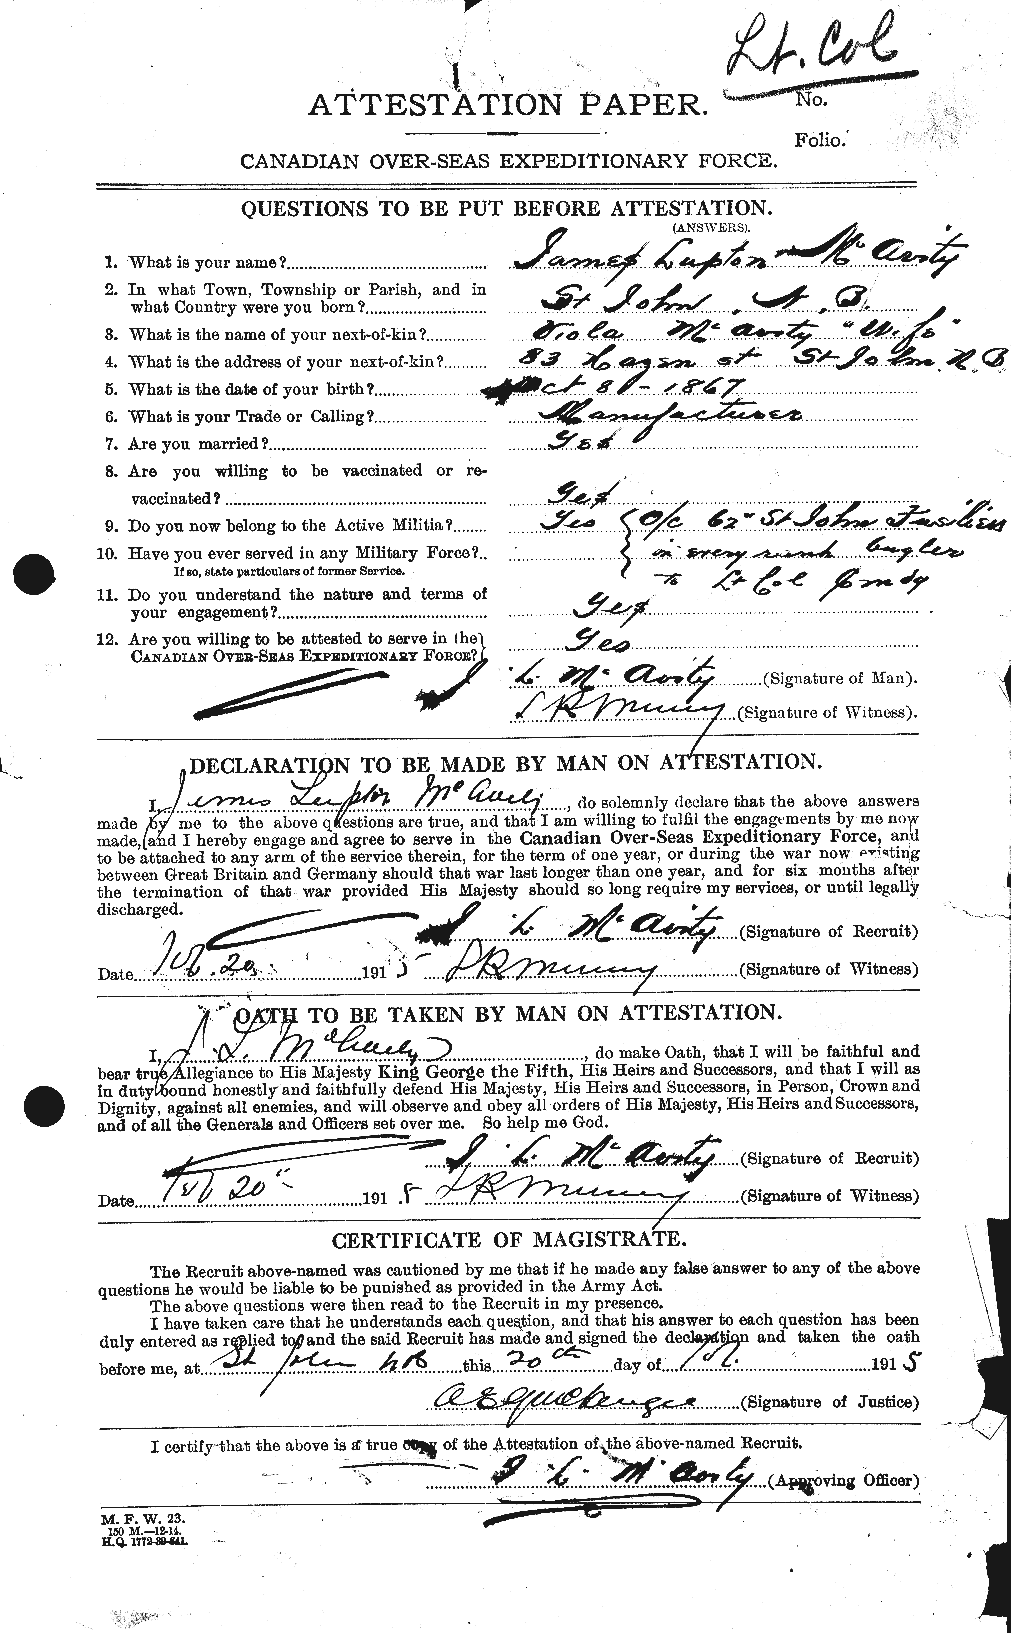 Personnel Records of the First World War - CEF 130043a